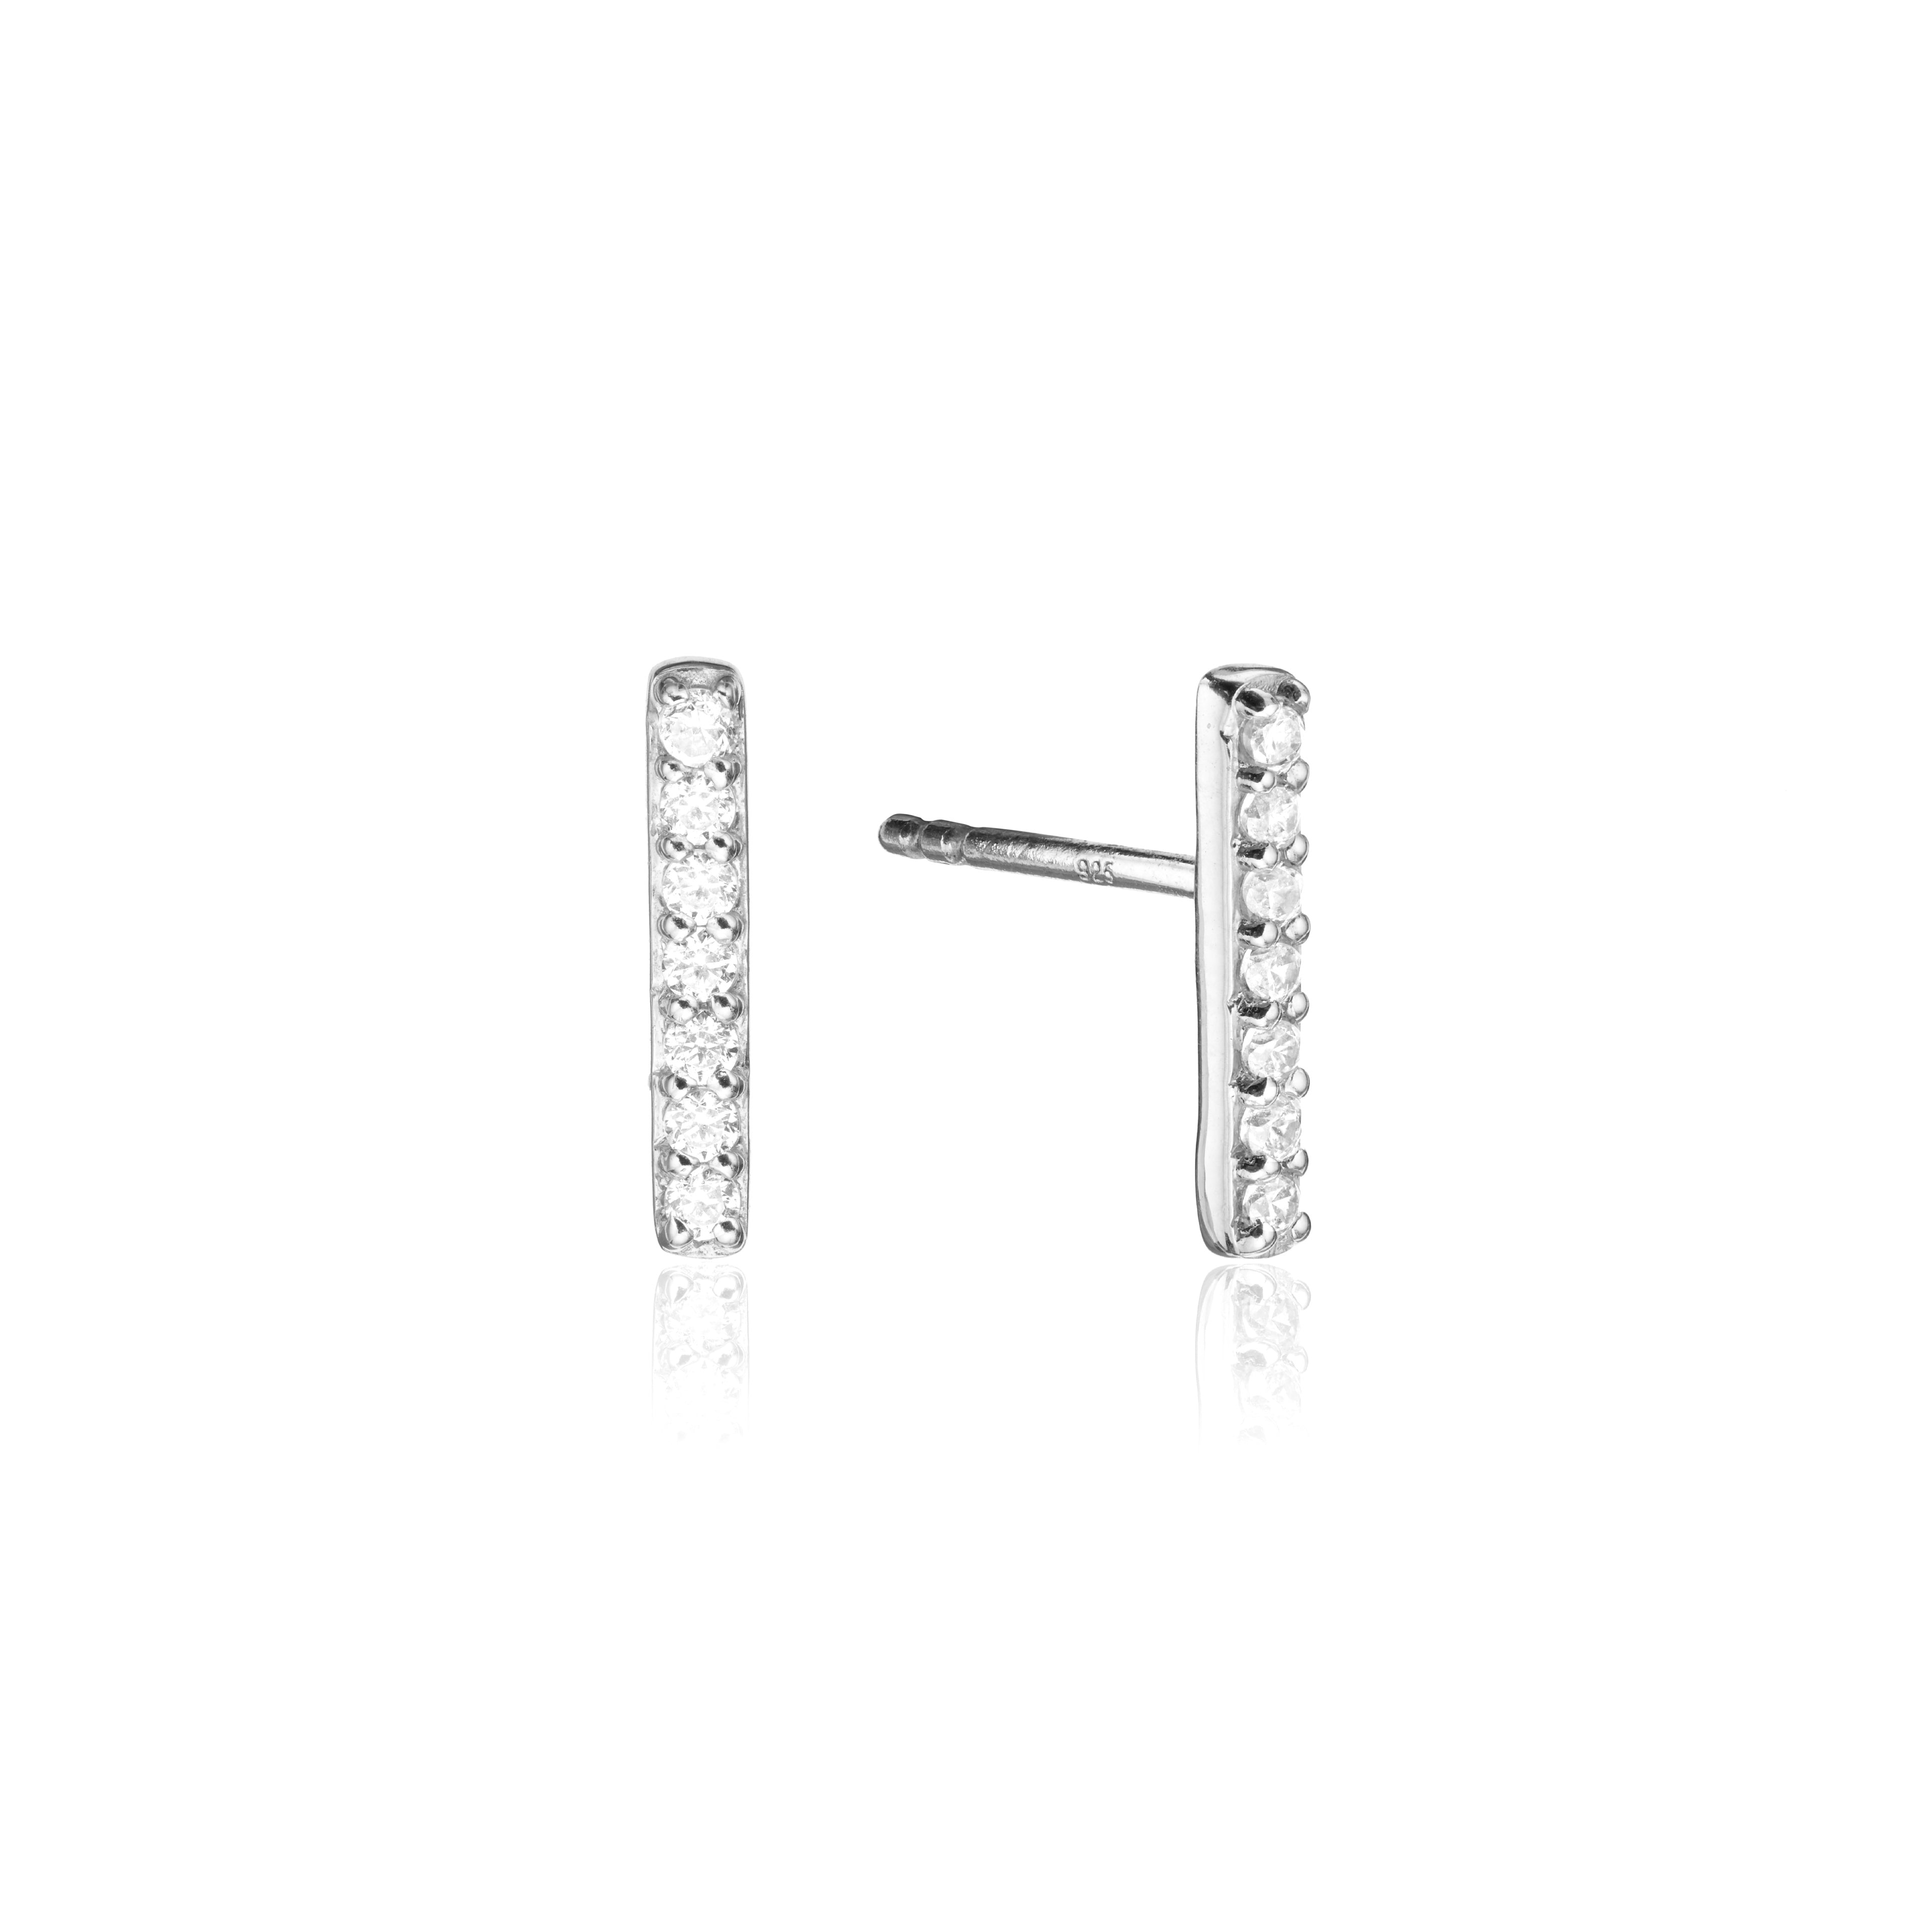 Silver diamond style bar stud earrings on a white background